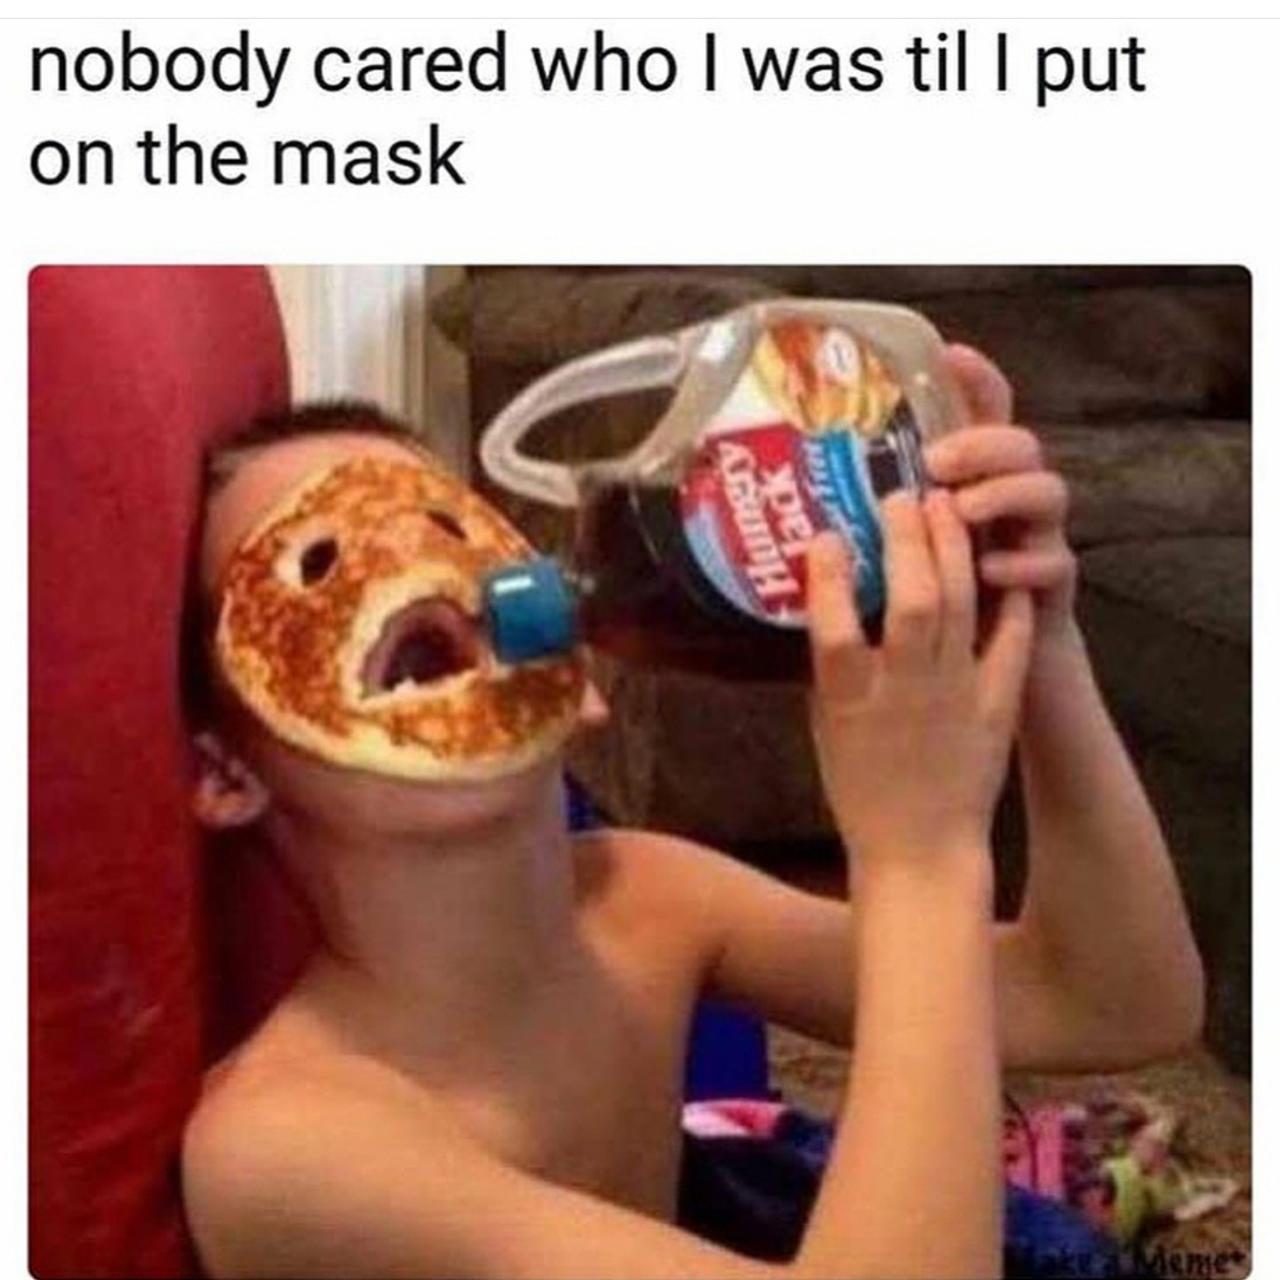 Remember that bad meme about the guy making a pancake mask?